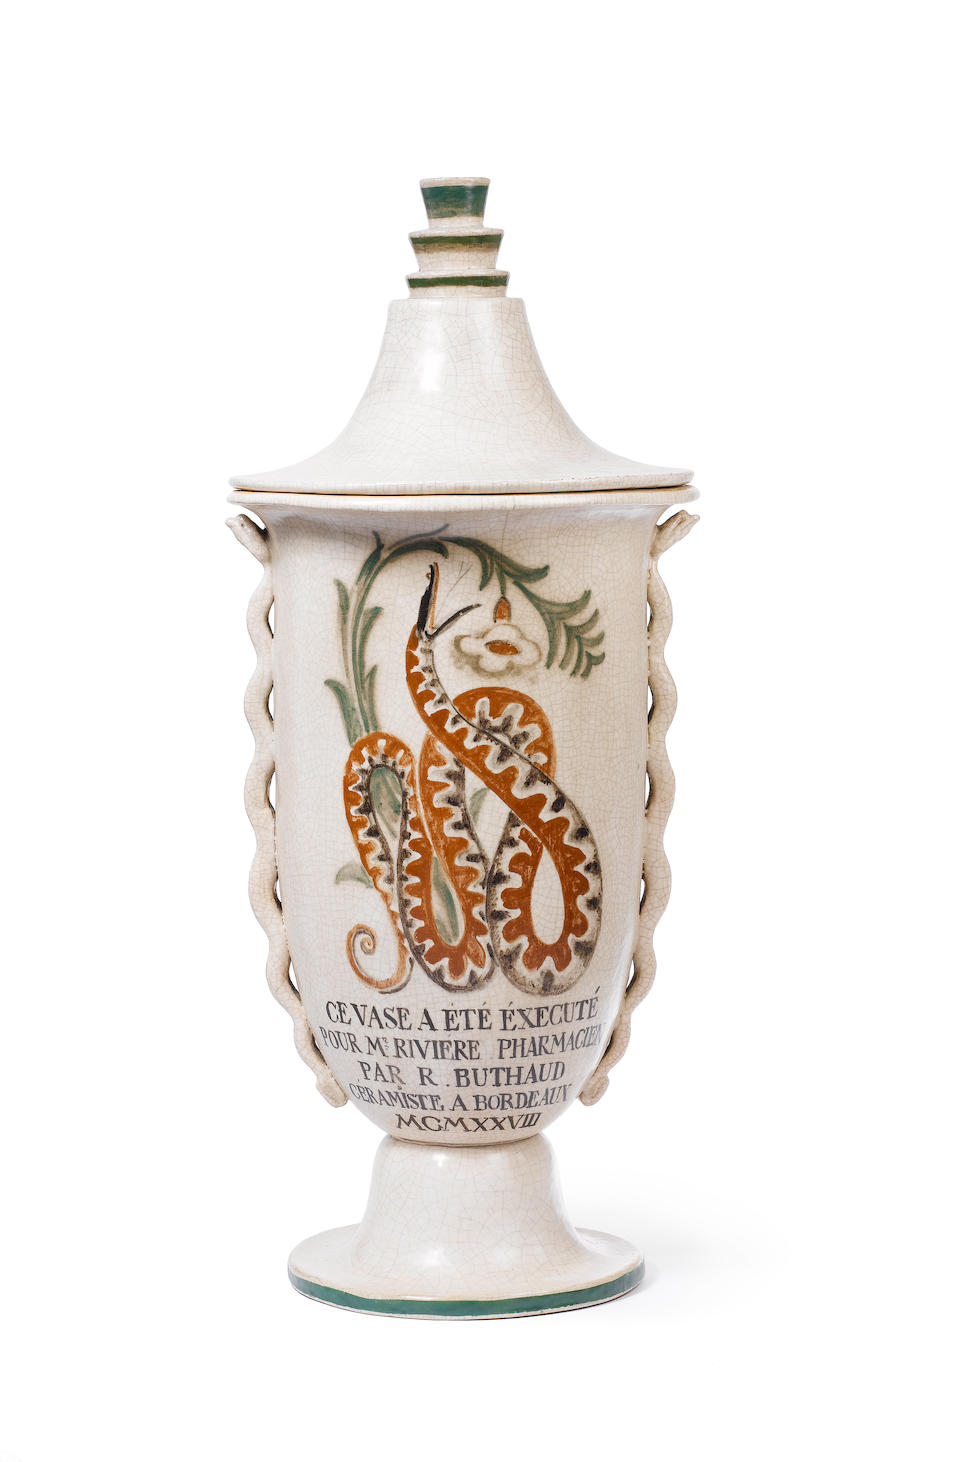 Ren&#233; Buthaud Important Jar and Cover 1928  painted earthenware signed and dated 'CE VASE A &#201;T&#201; EXECUT&#201; POUR MR M. RIVI&#200;RE PHARMACIEN PAR R. BUTHAUD C&#201;RAMISTE A BORDEAUX MCMXXVVIII' to reverse  Height: 96 cm. 37 7/8 in.